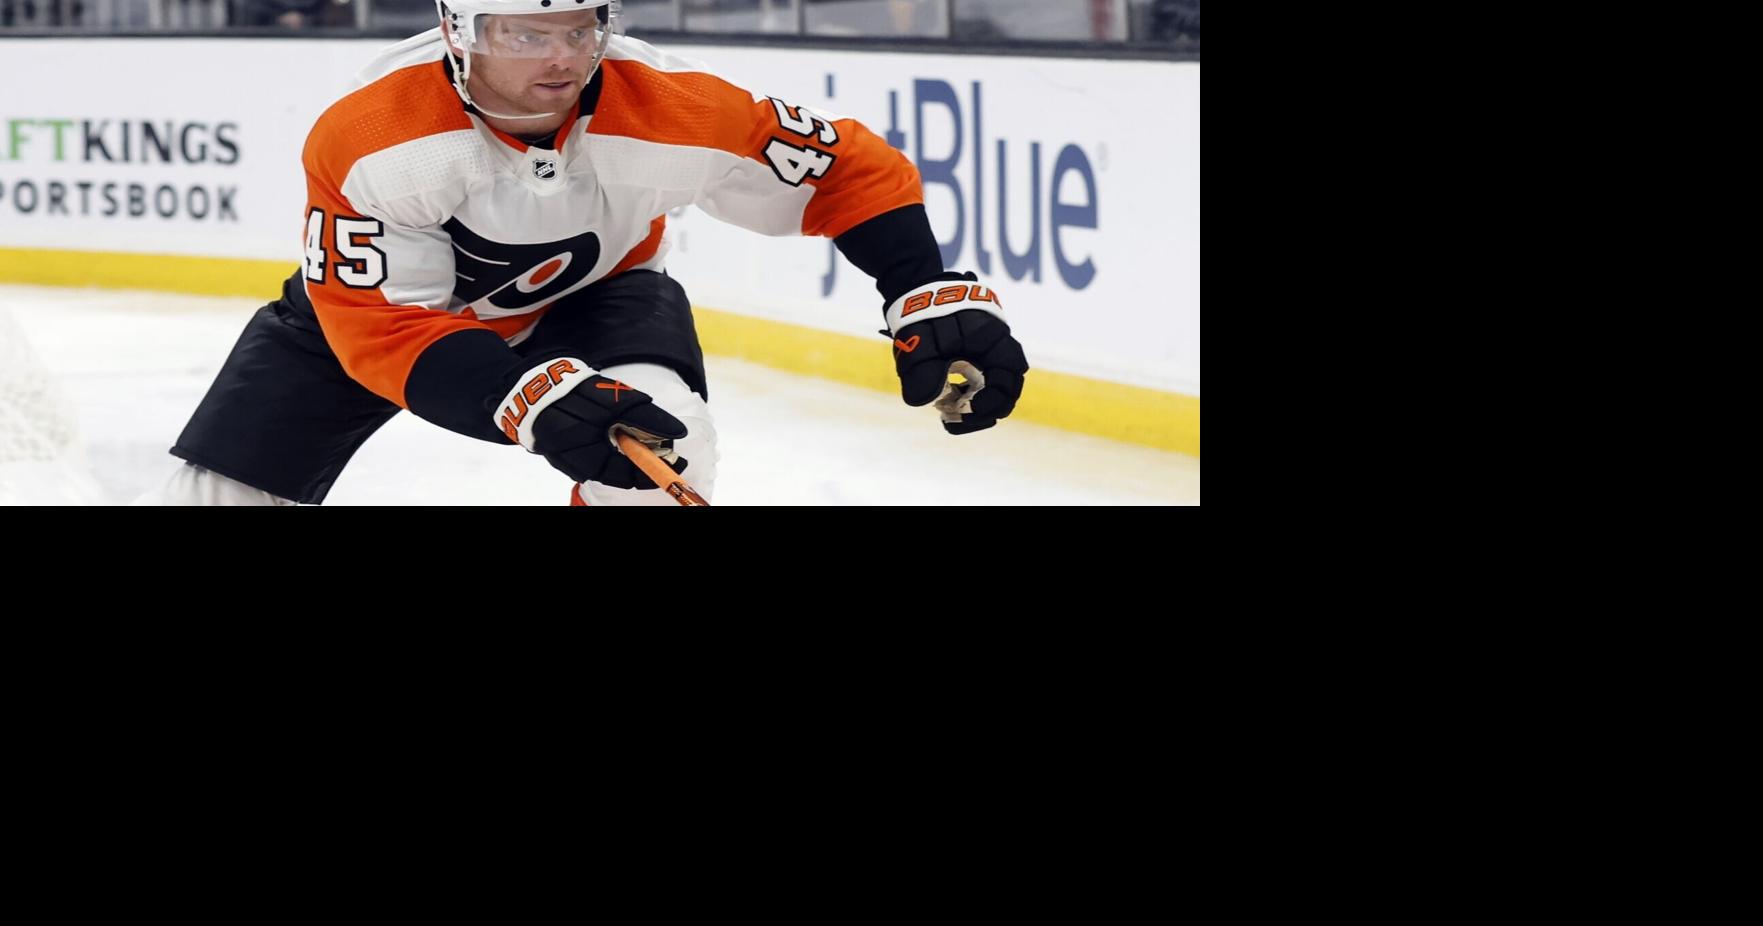 Flyers Trade Ivan Provorov in 3-Team Deal